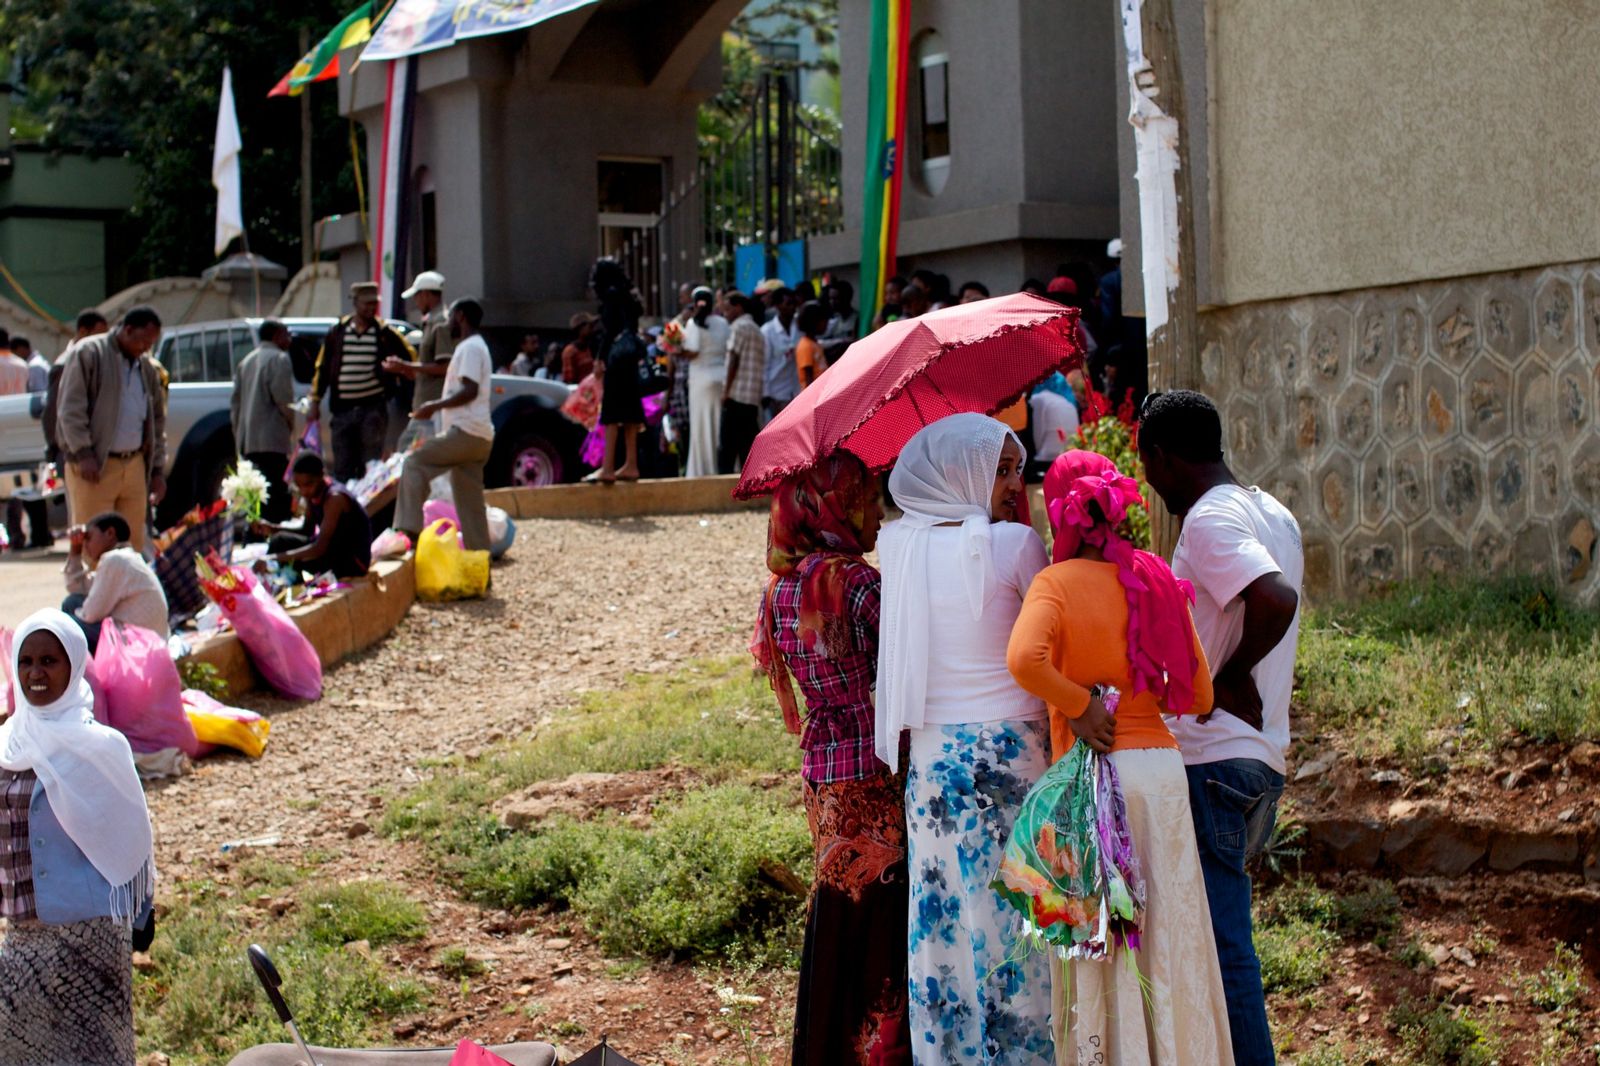 Research-practice partnerships in Ethiopia confront sexual violence on campus